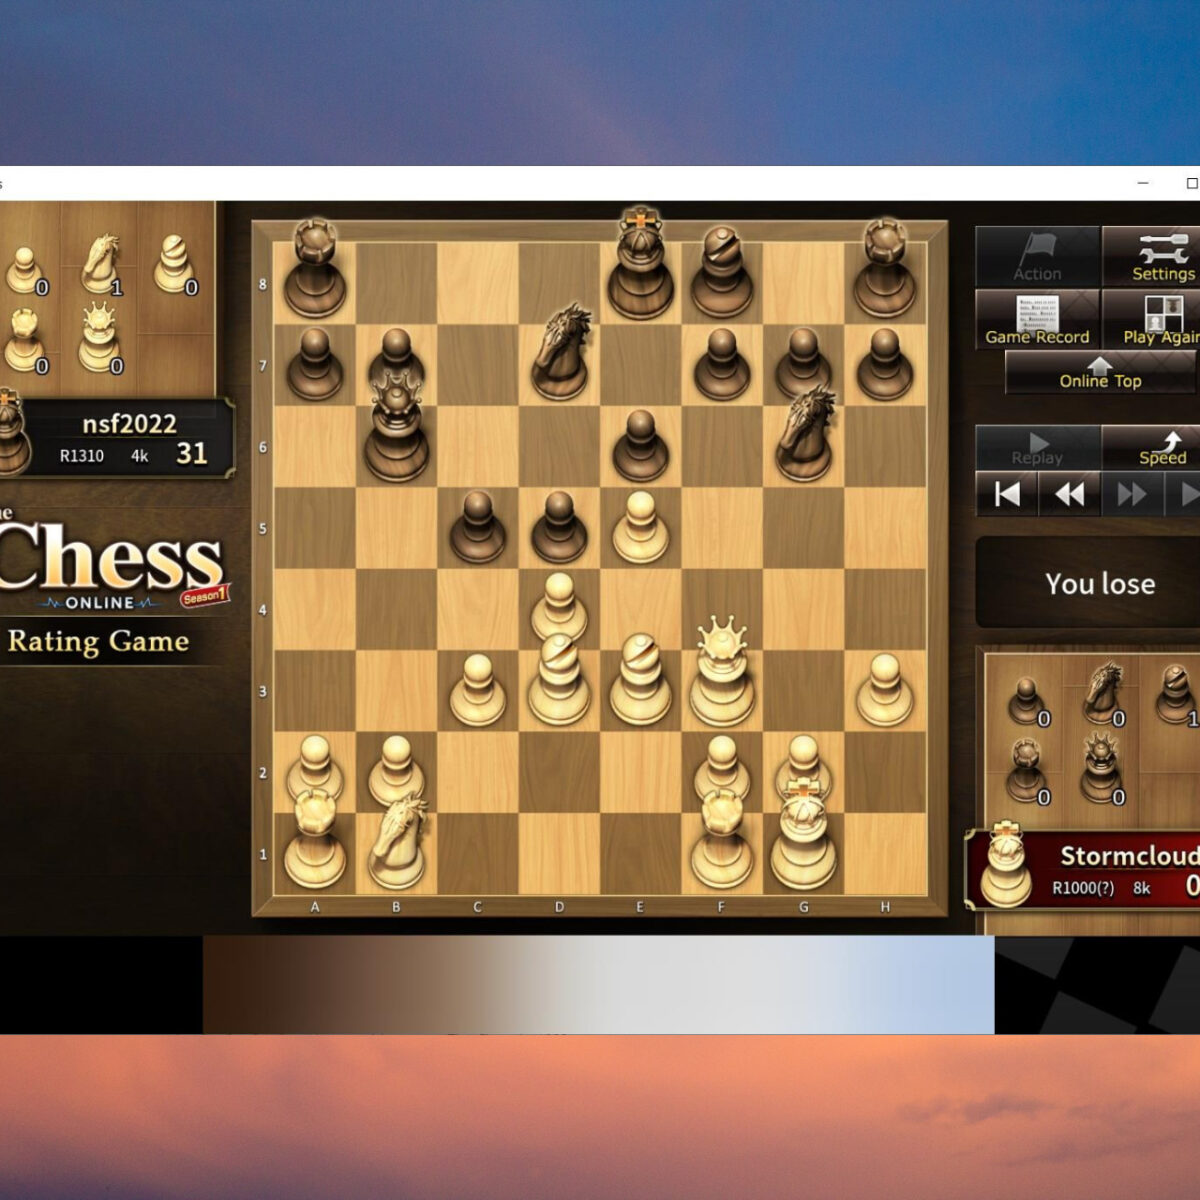 Get The Chess Lv.100 - Microsoft Store